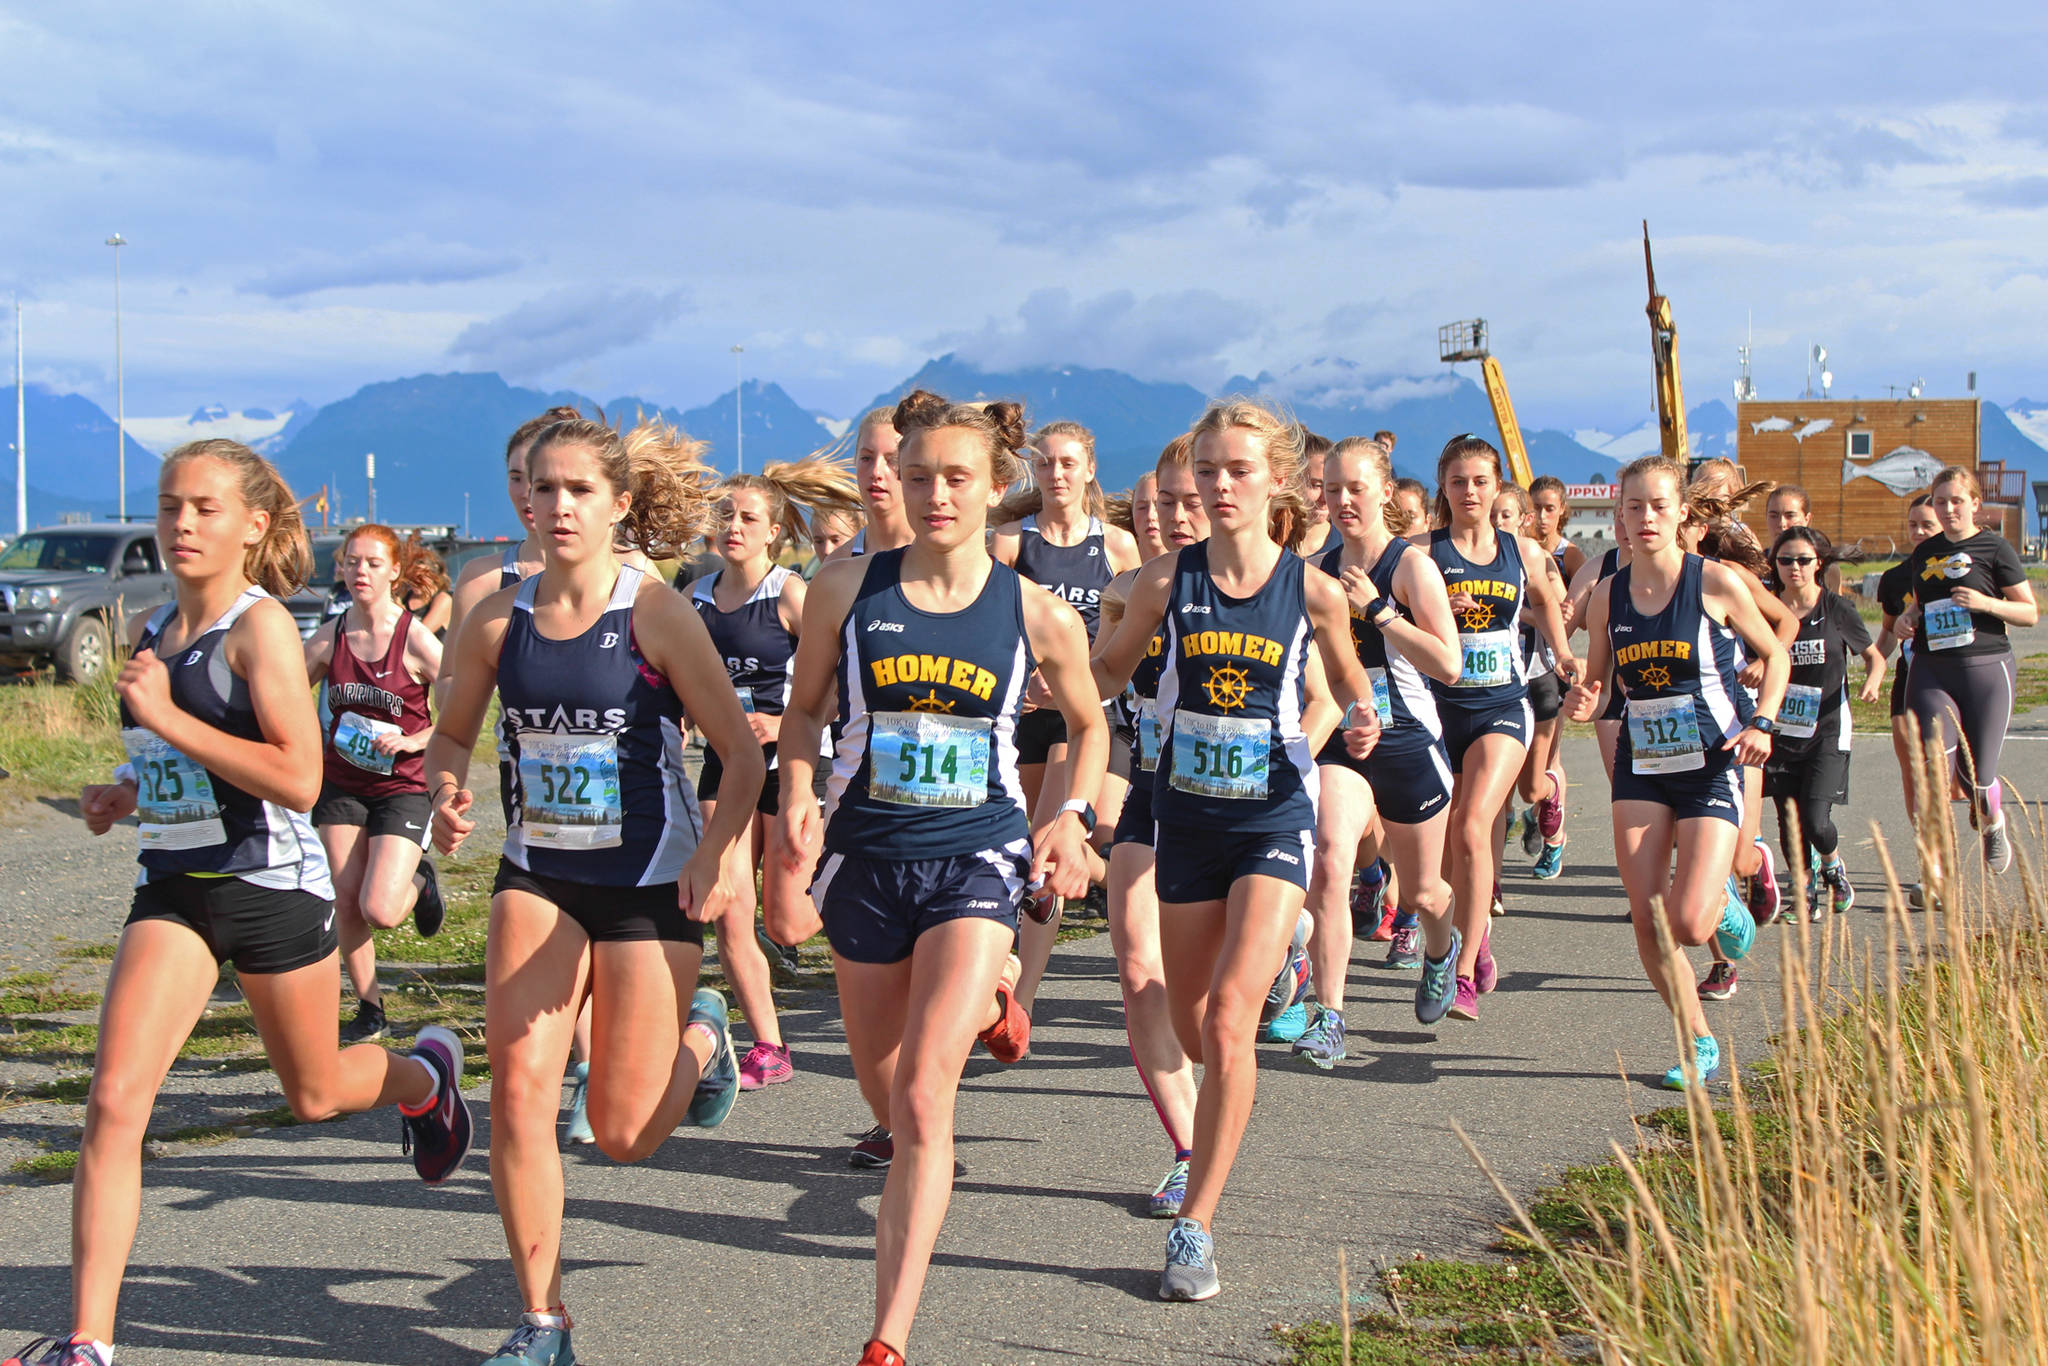 Athletes from Homer High School and Soldotna High School lead a pack of cross-country runners in the girls 5K race during the Homer Invitational on Friday, Sept. 7, 2018 on the Homer Spit in Homer, Alaska. The Soldotna girls team took first and Homer placed second by just one point. (Photo by Megan Pacer/Homer News)